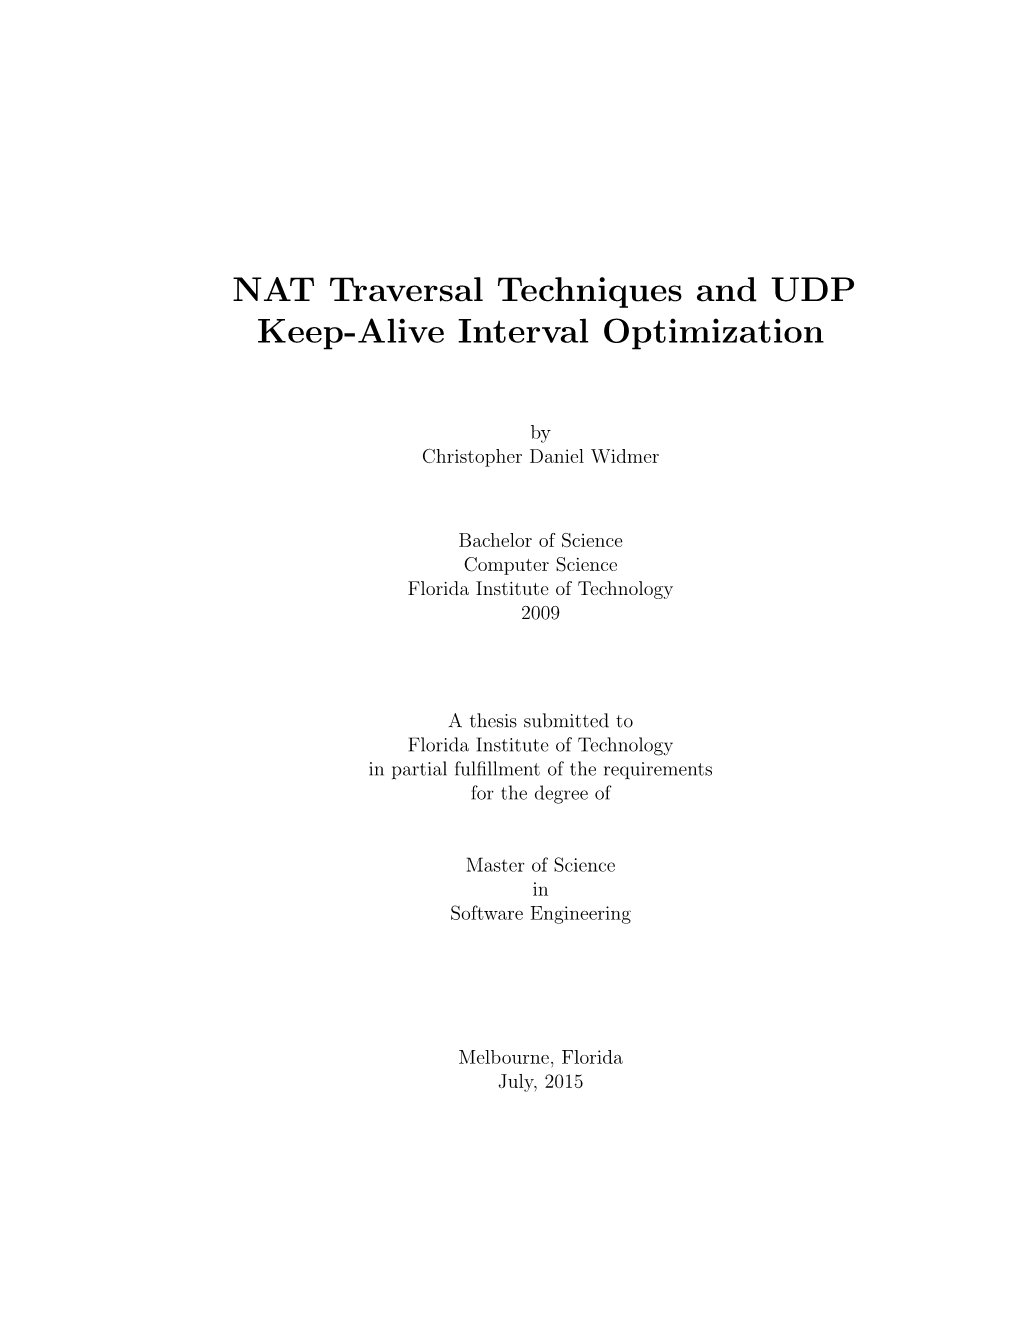 NAT Traversal Techniques and UDP Keep-Alive Interval Optimization